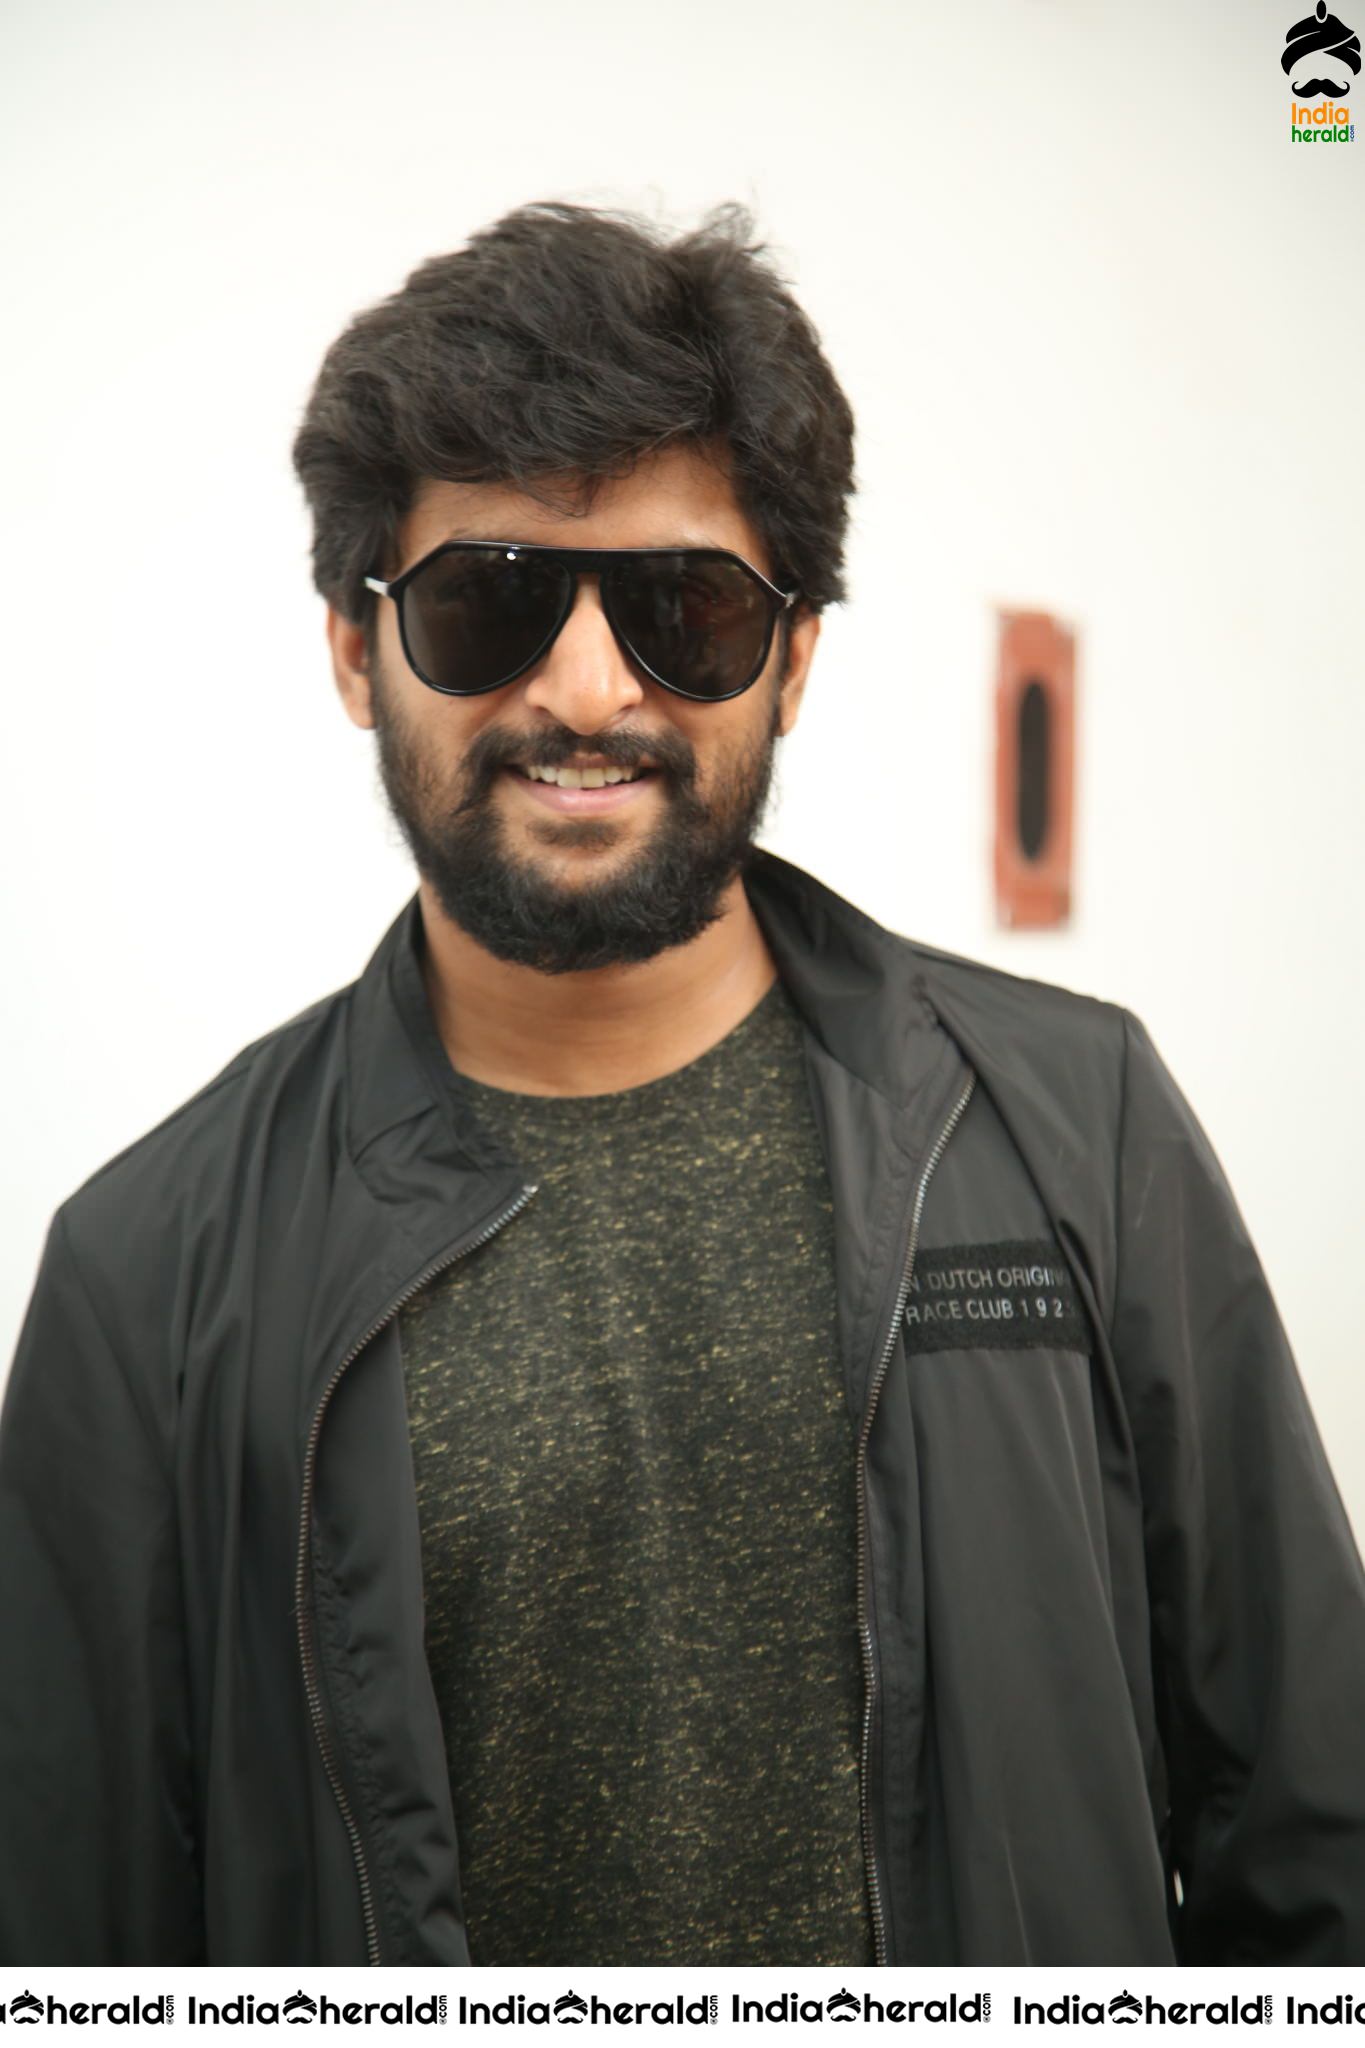 Actor Nani Looking Smart and Suave in these Photos